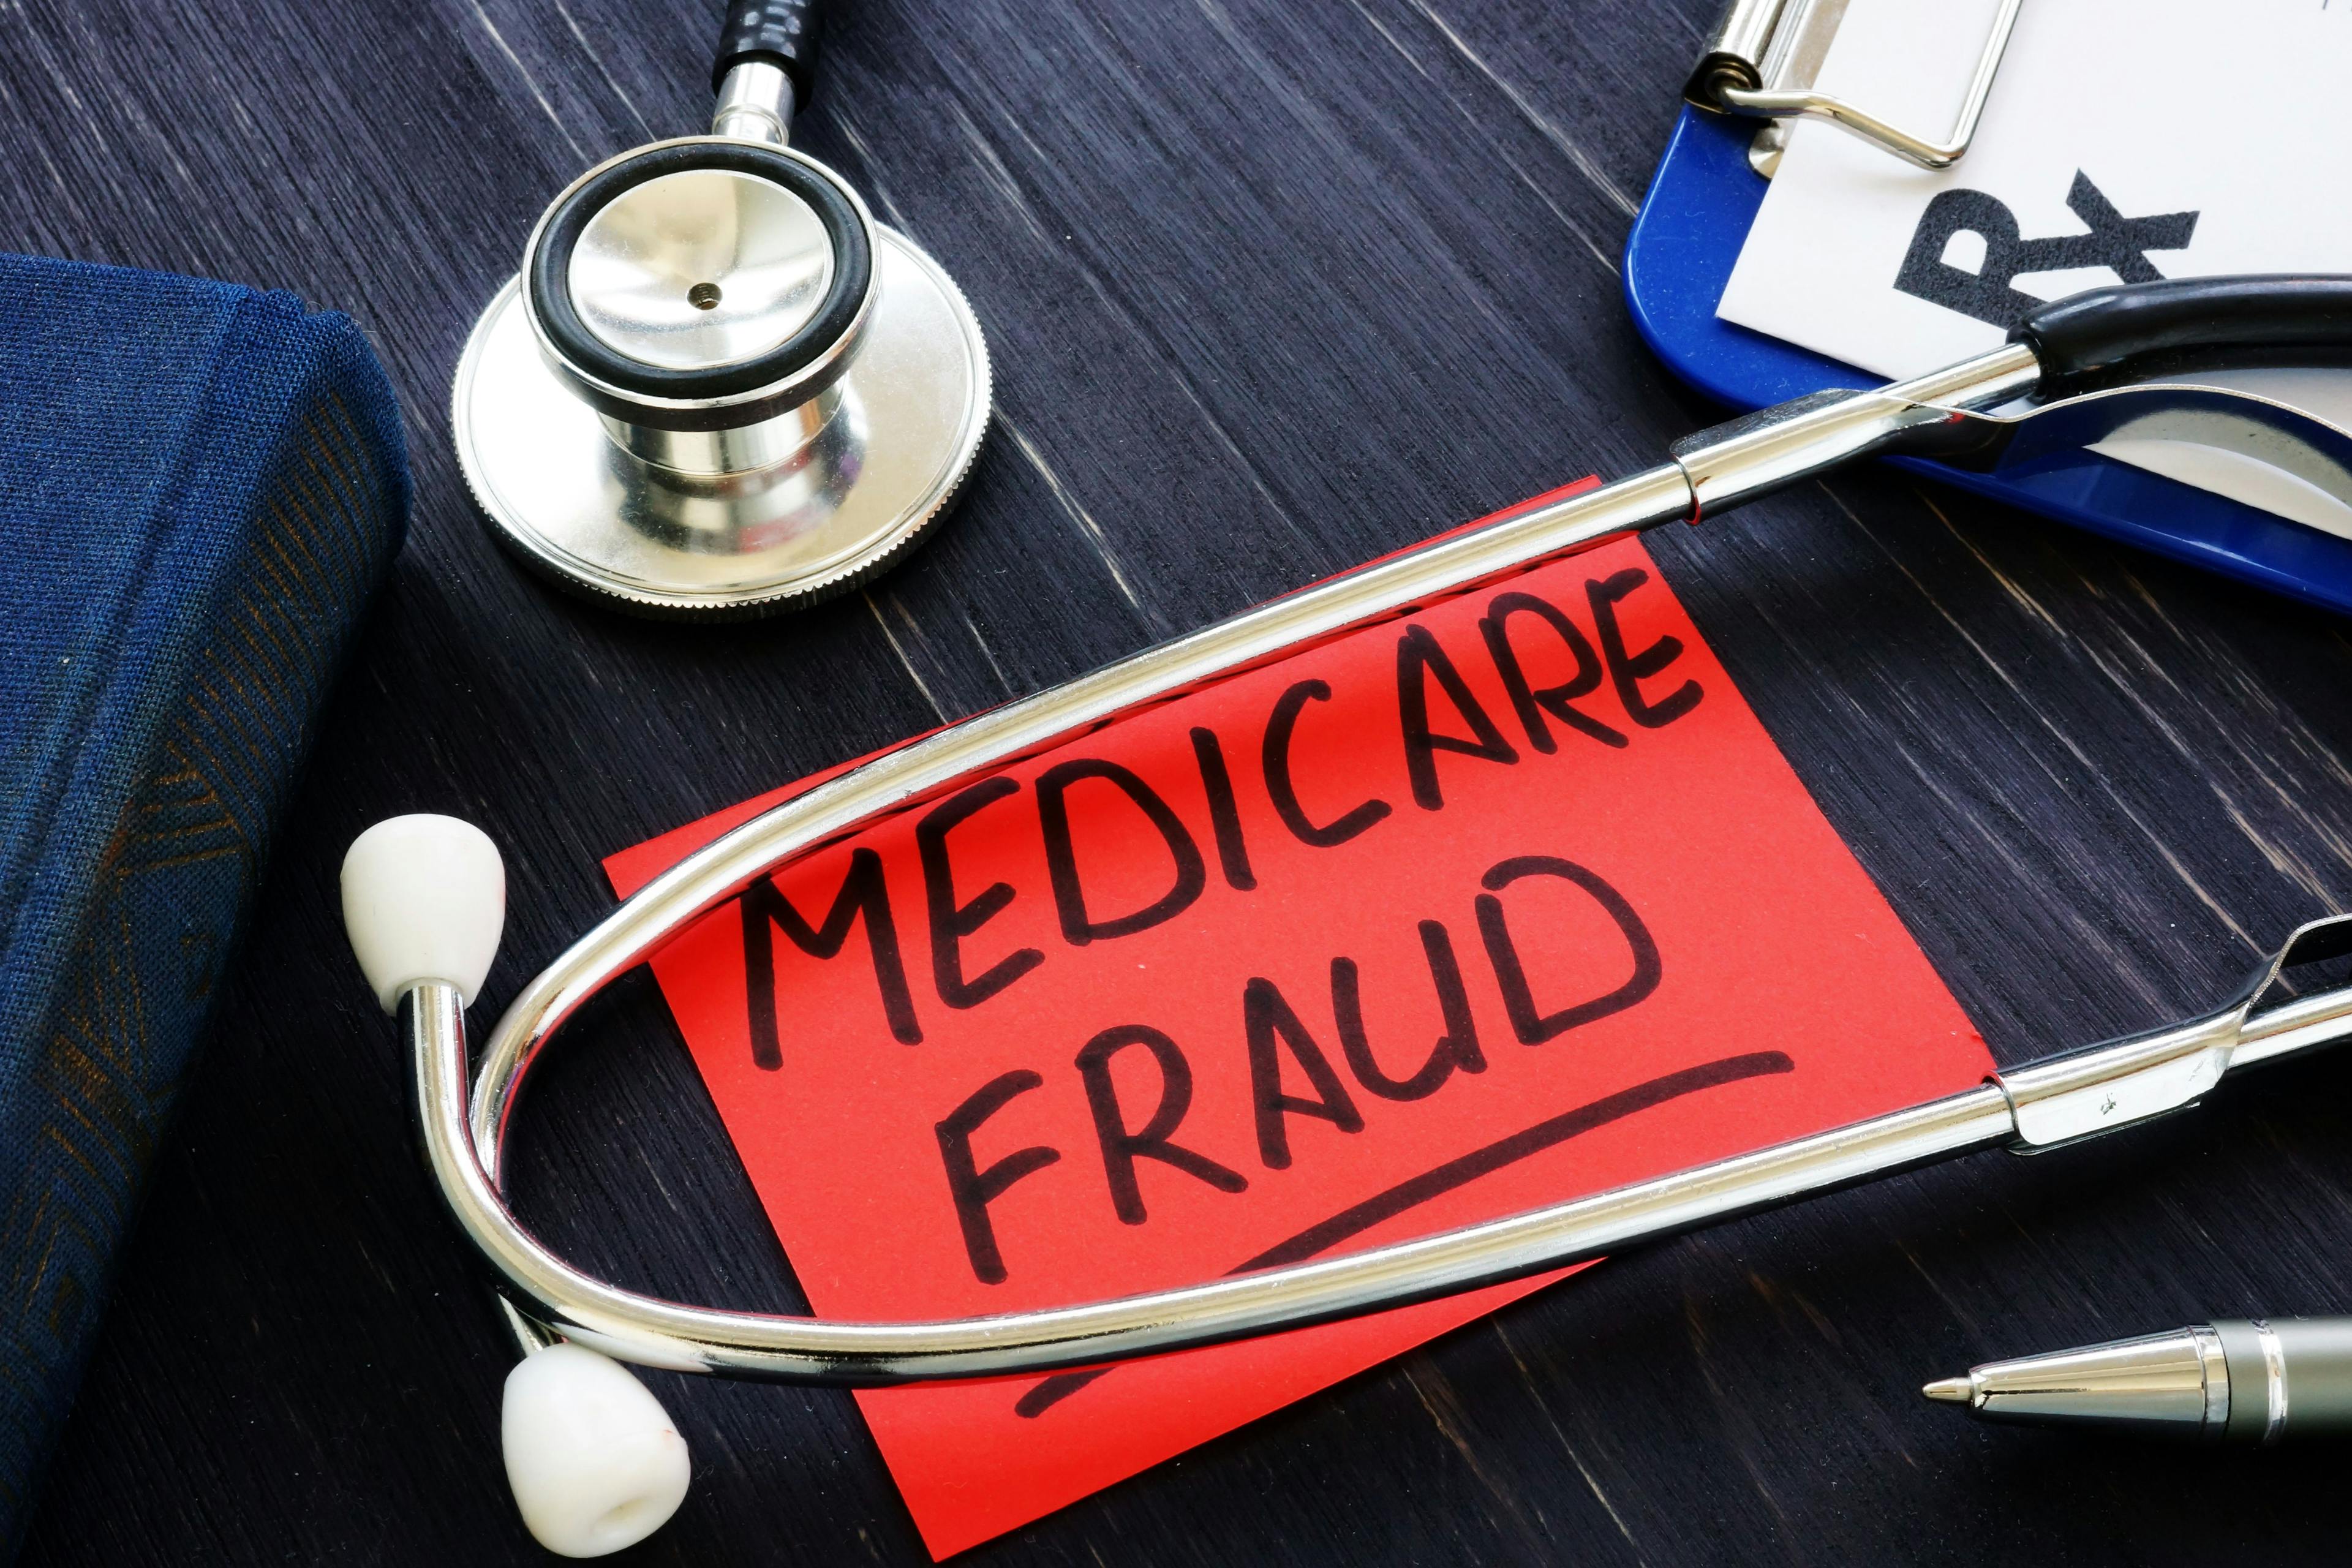 Medicare Fraud Awareness: Safeguarding Yourself and Reporting Suspected Fraud